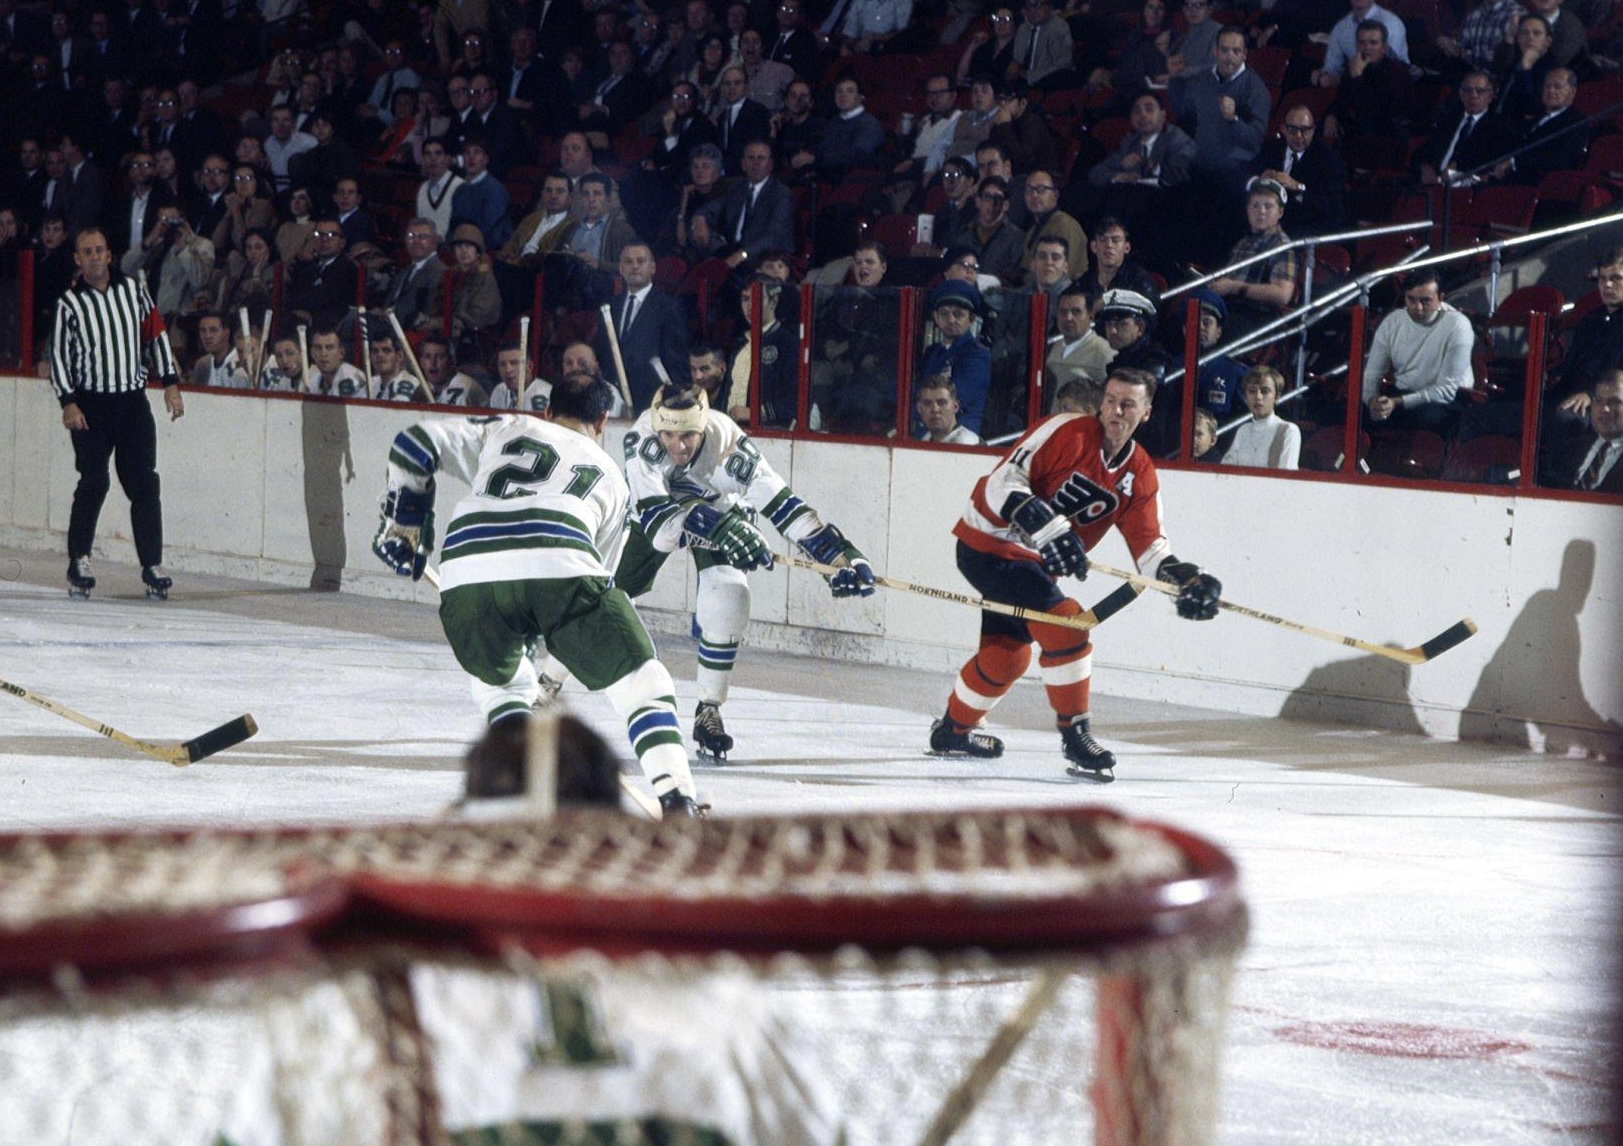 This Day In Hockey History-June 10, 1970-White Skates For